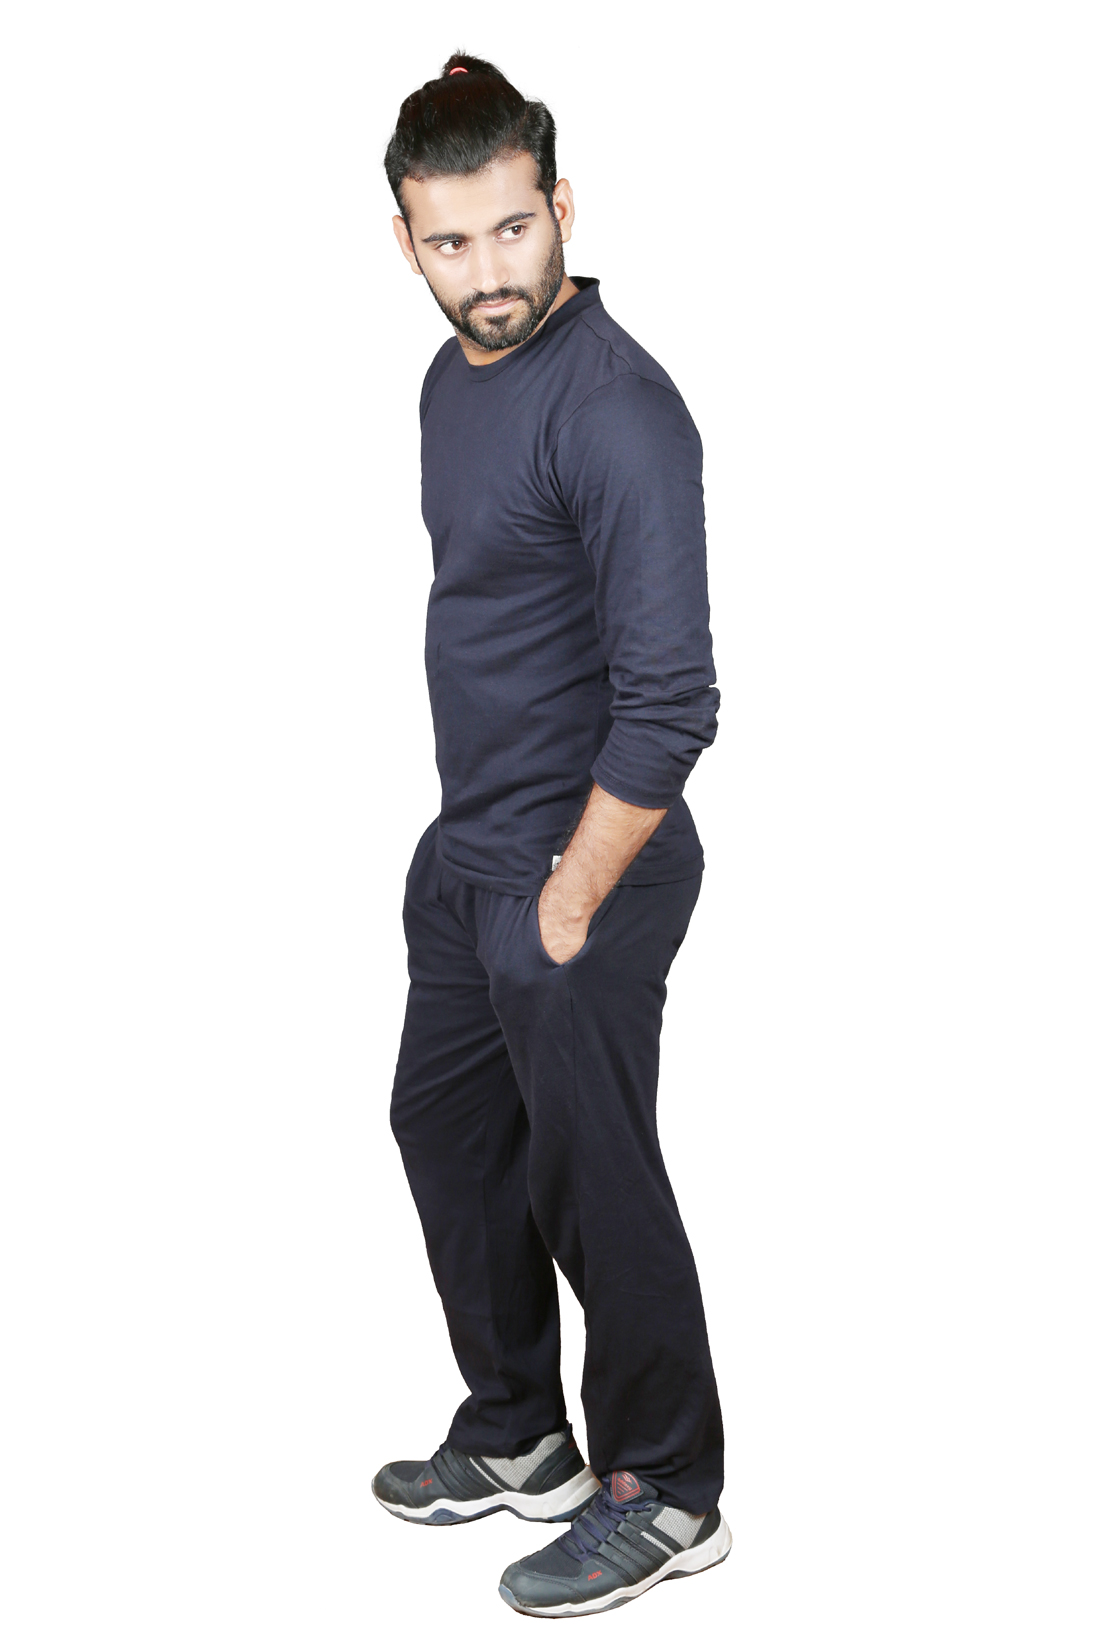 Buy yaya night suit for mens Online @ ₹899 from ShopClues